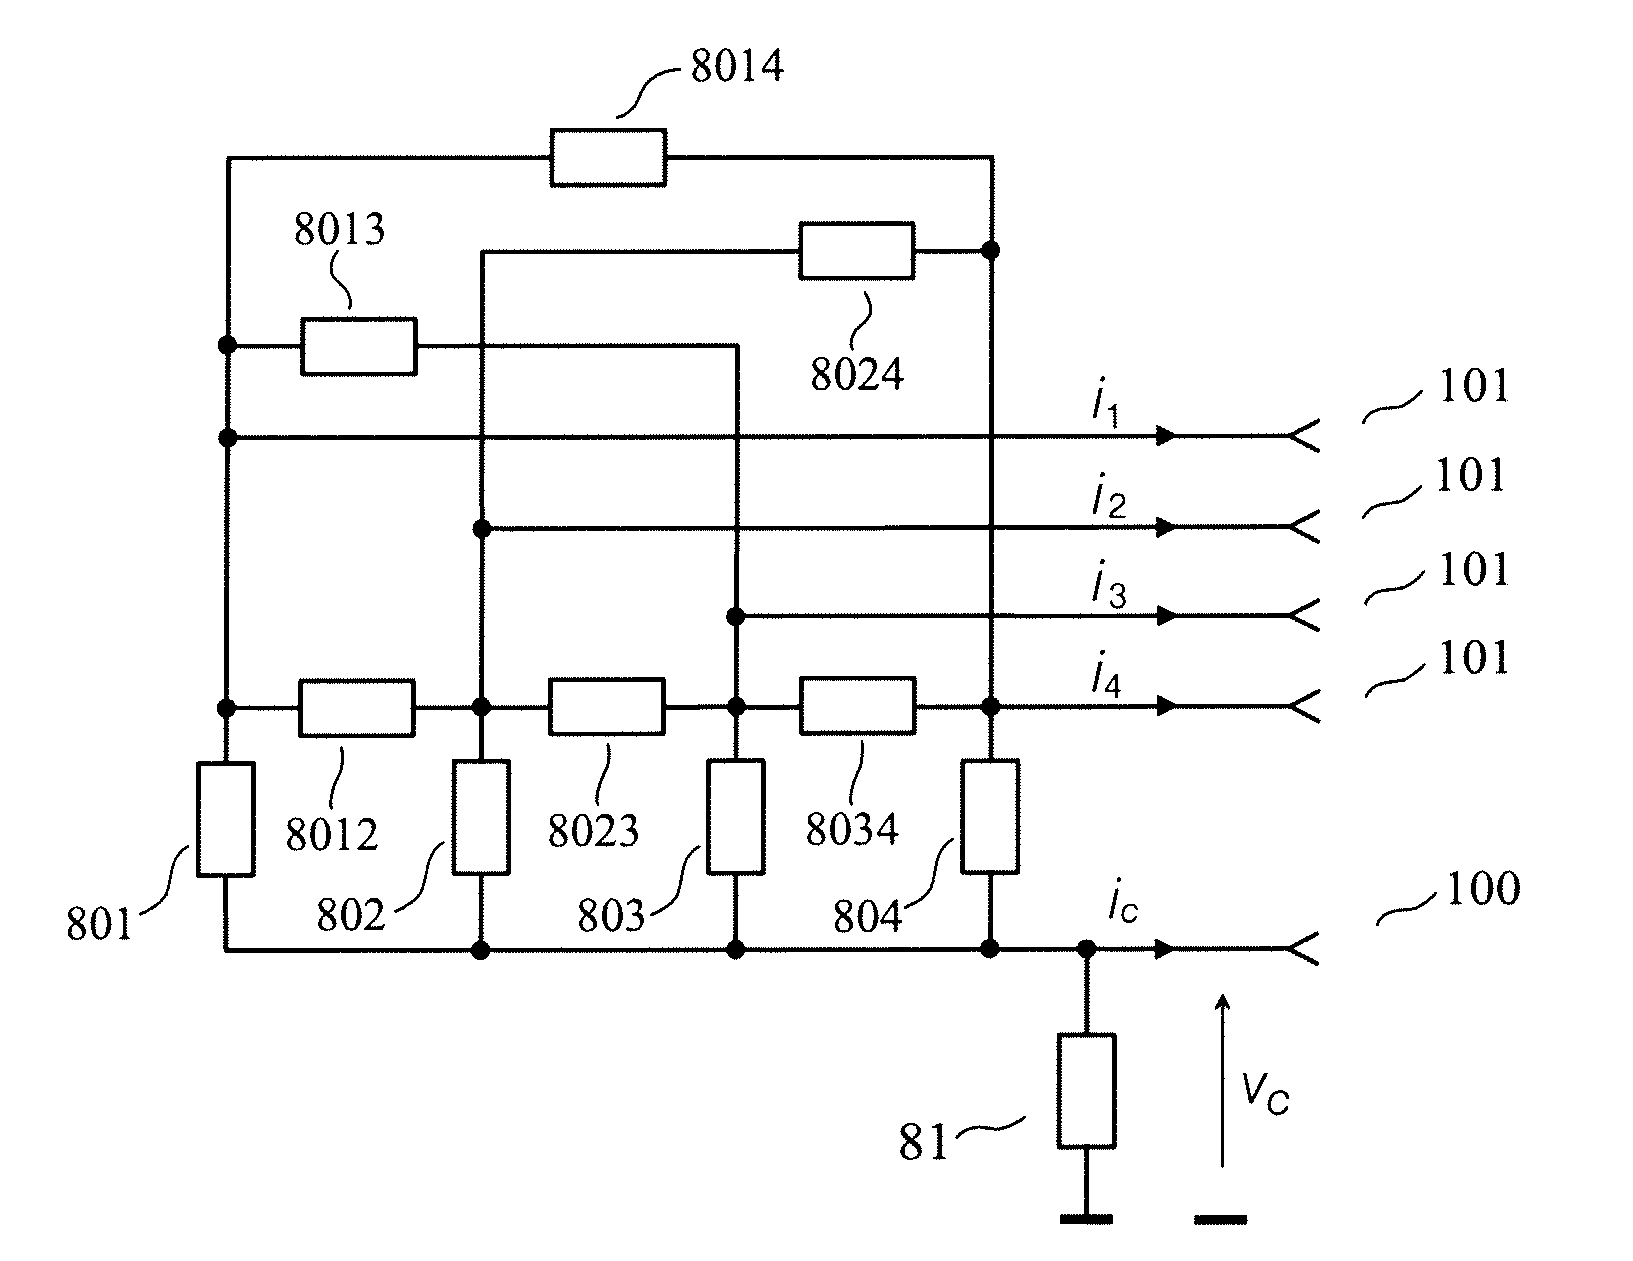 Multichannel interfacing device having a termination circuit